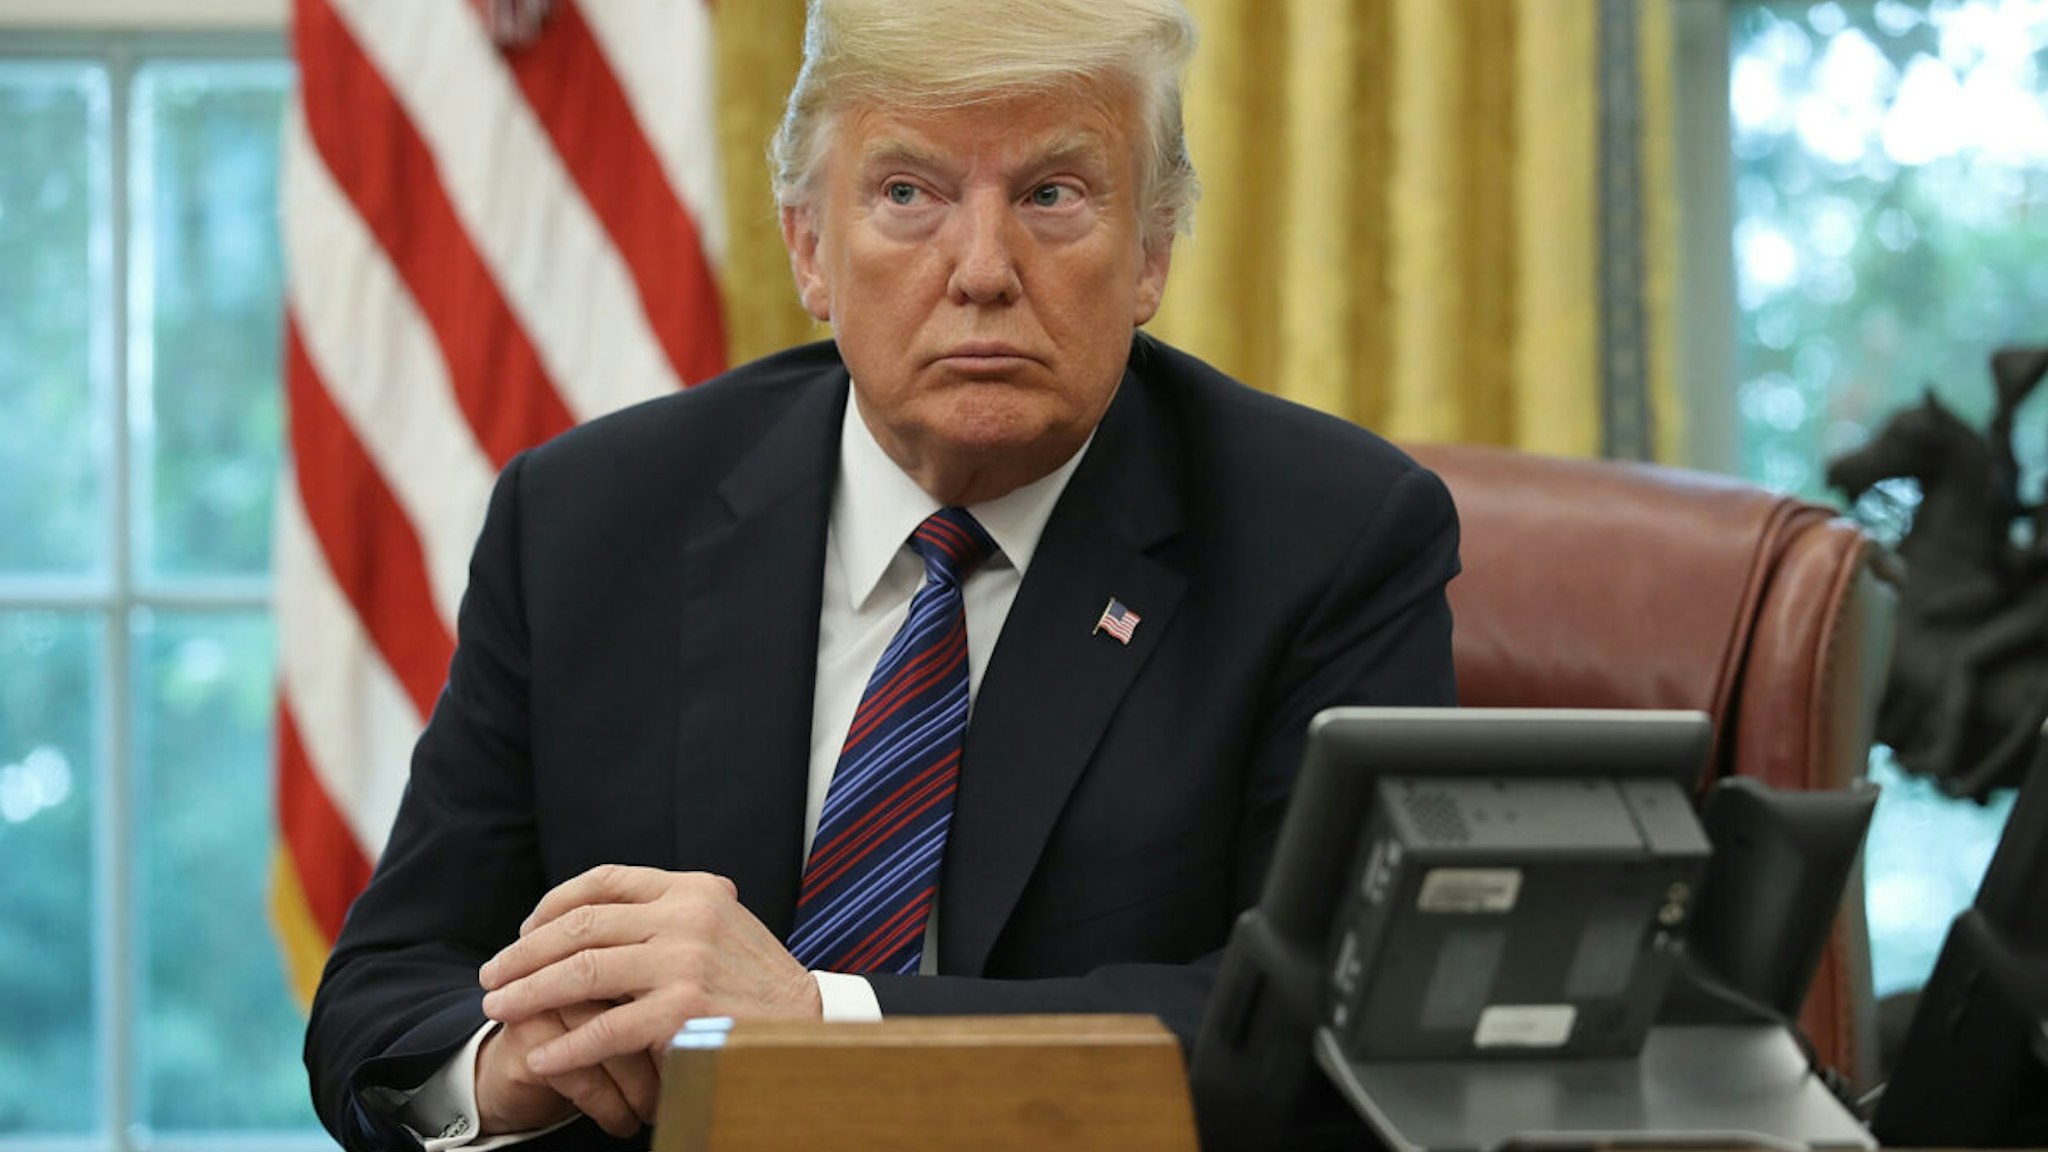 U.S. President Donald Trump speaks on the telephone via speakerphone with Mexican President Enrique Pena Nieto in the Oval Office of the White House on August 27, 2018 in Washington, DC.